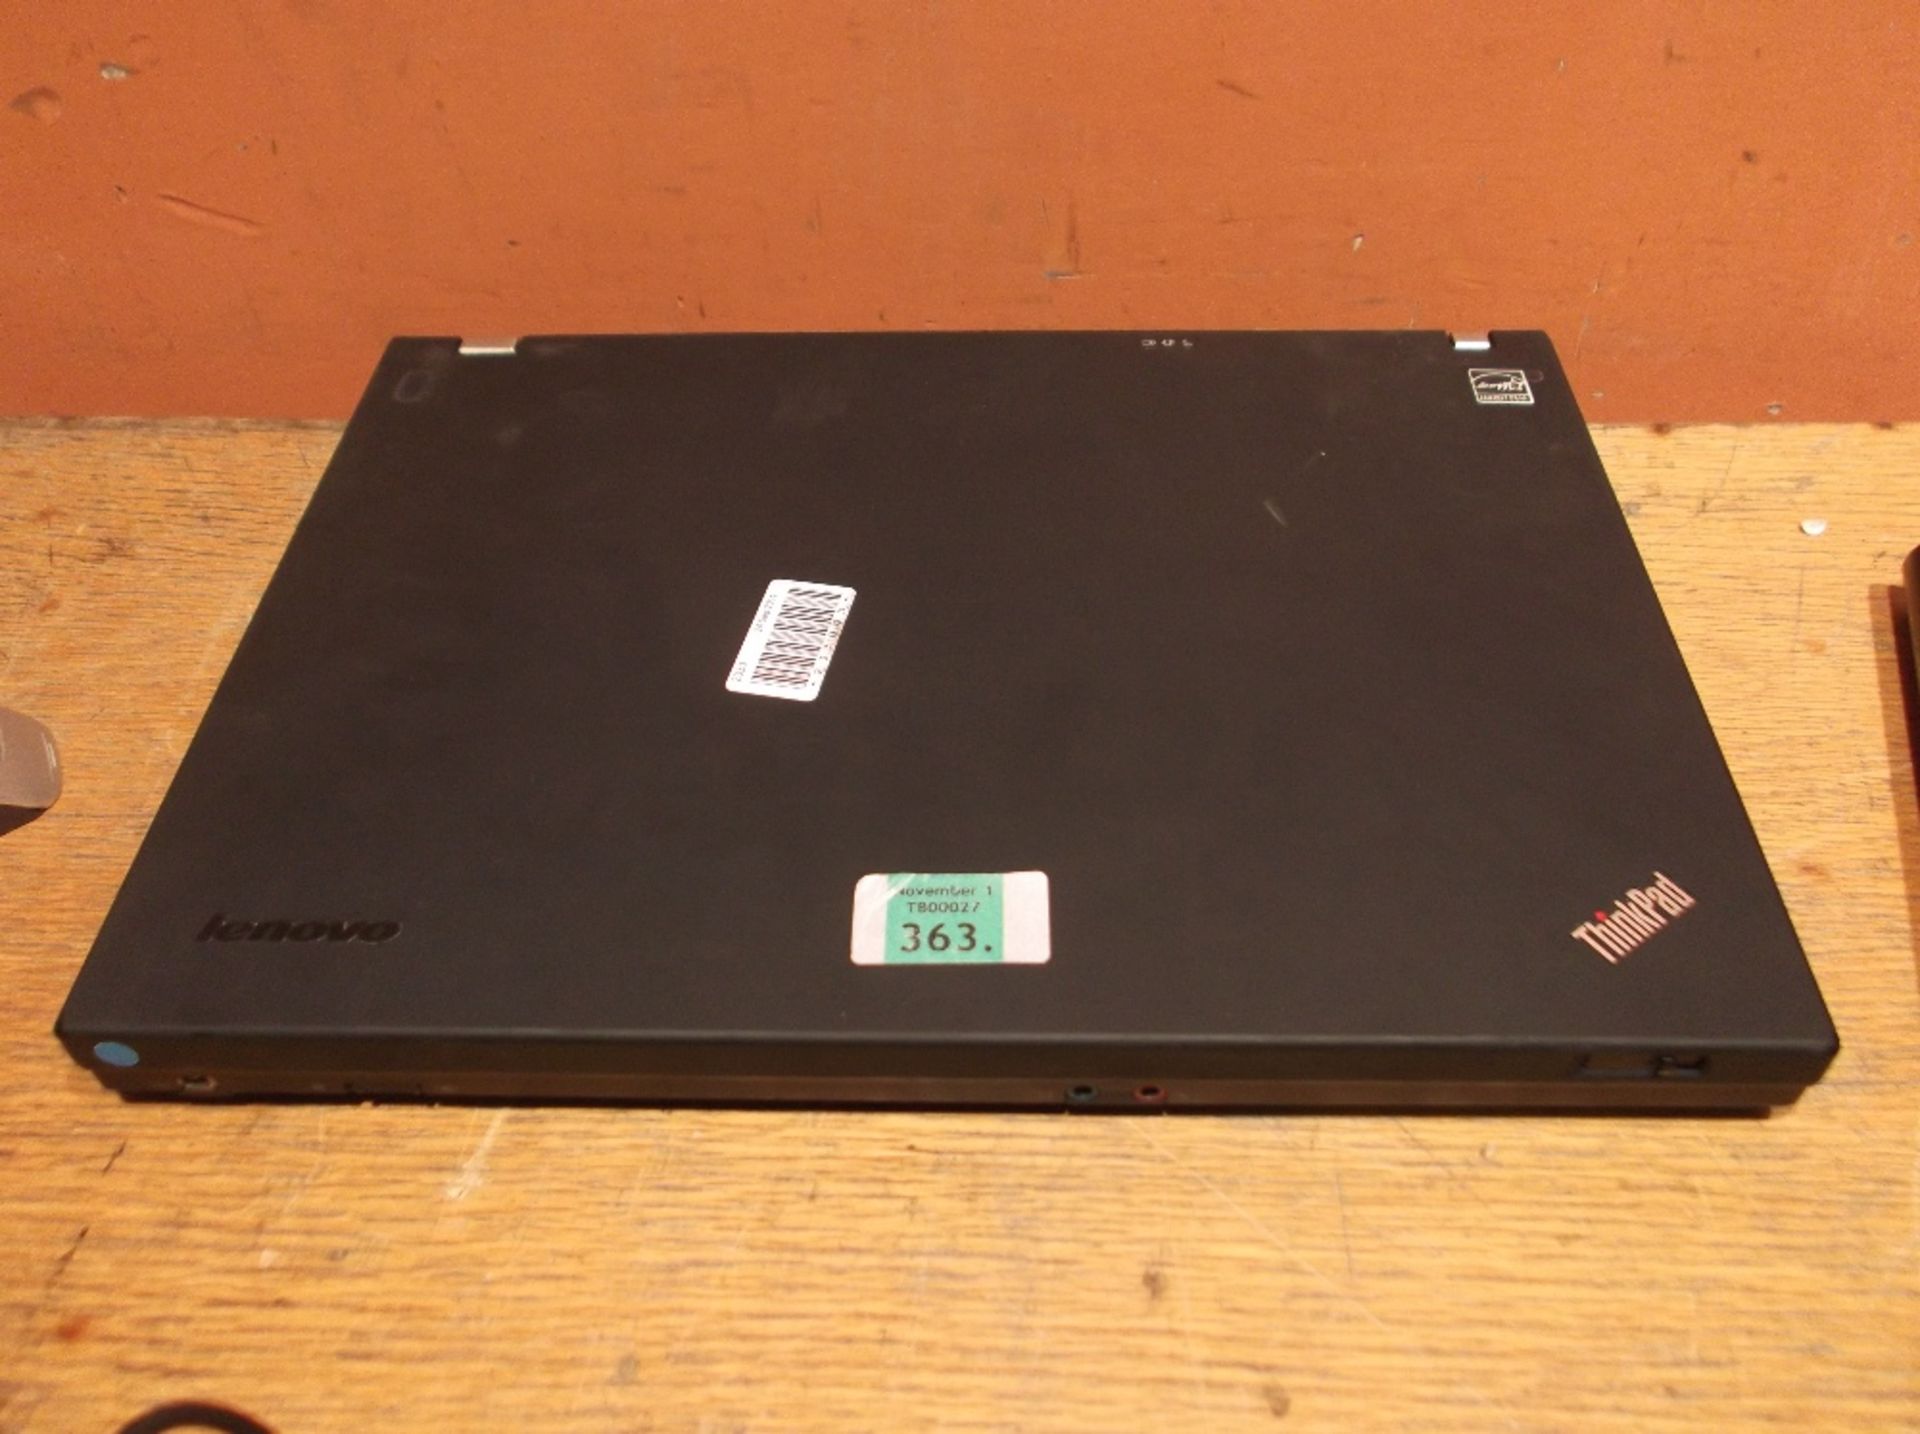 LENOVO T400 Laptop - Intel Core 2 Duo @ 2.53Ghz - 2GB Ram - 160GB Hdd - DVD-Rom - Charger - Extended - Image 2 of 2